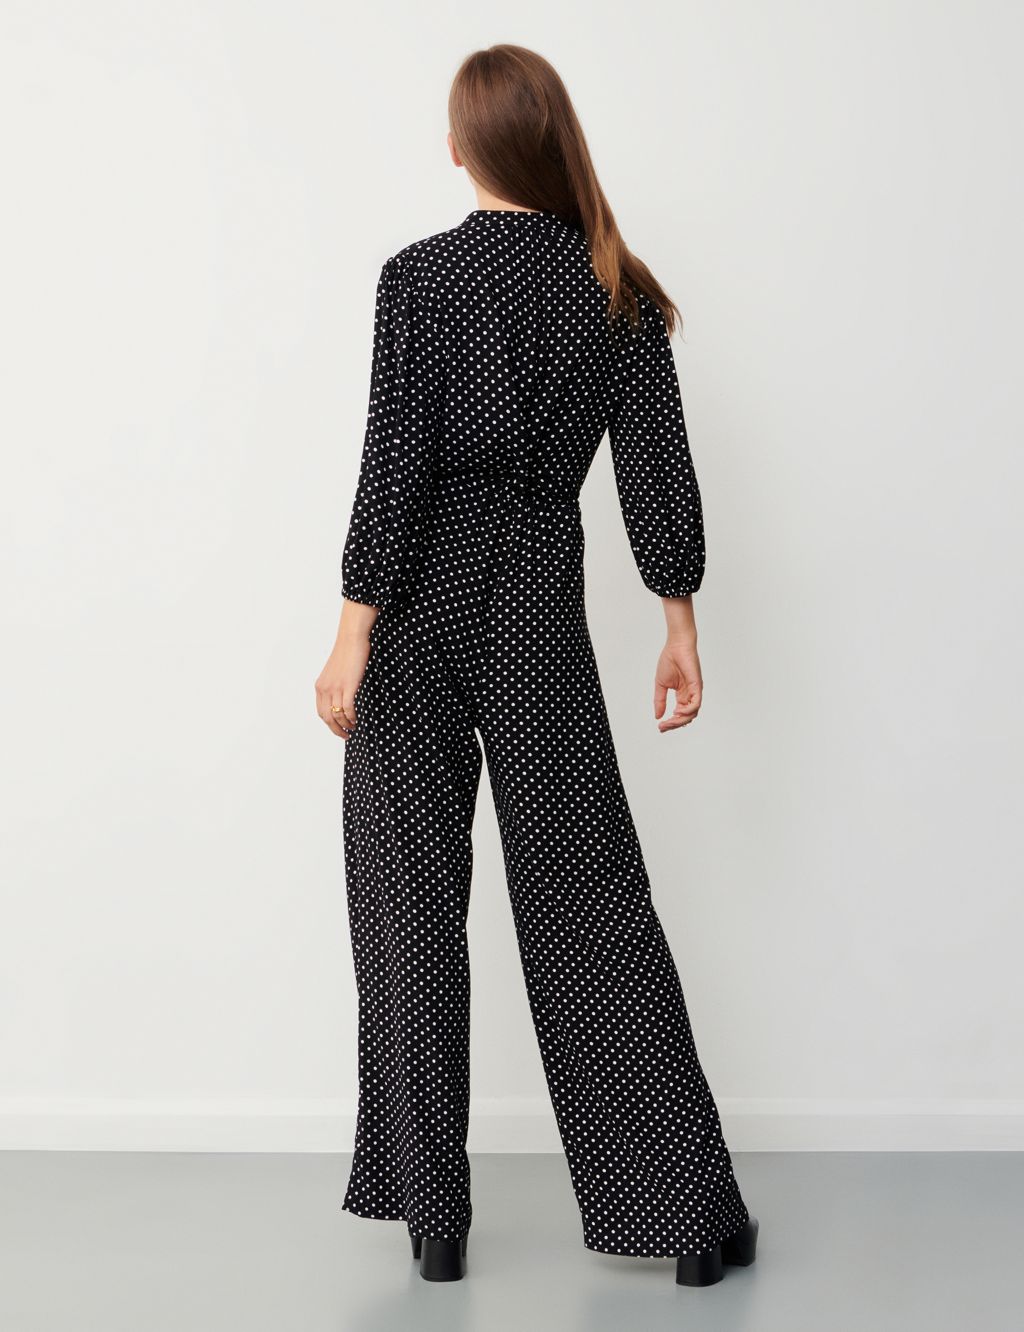 Polka Dot Tie Detail Waisted Jumpsuit image 2